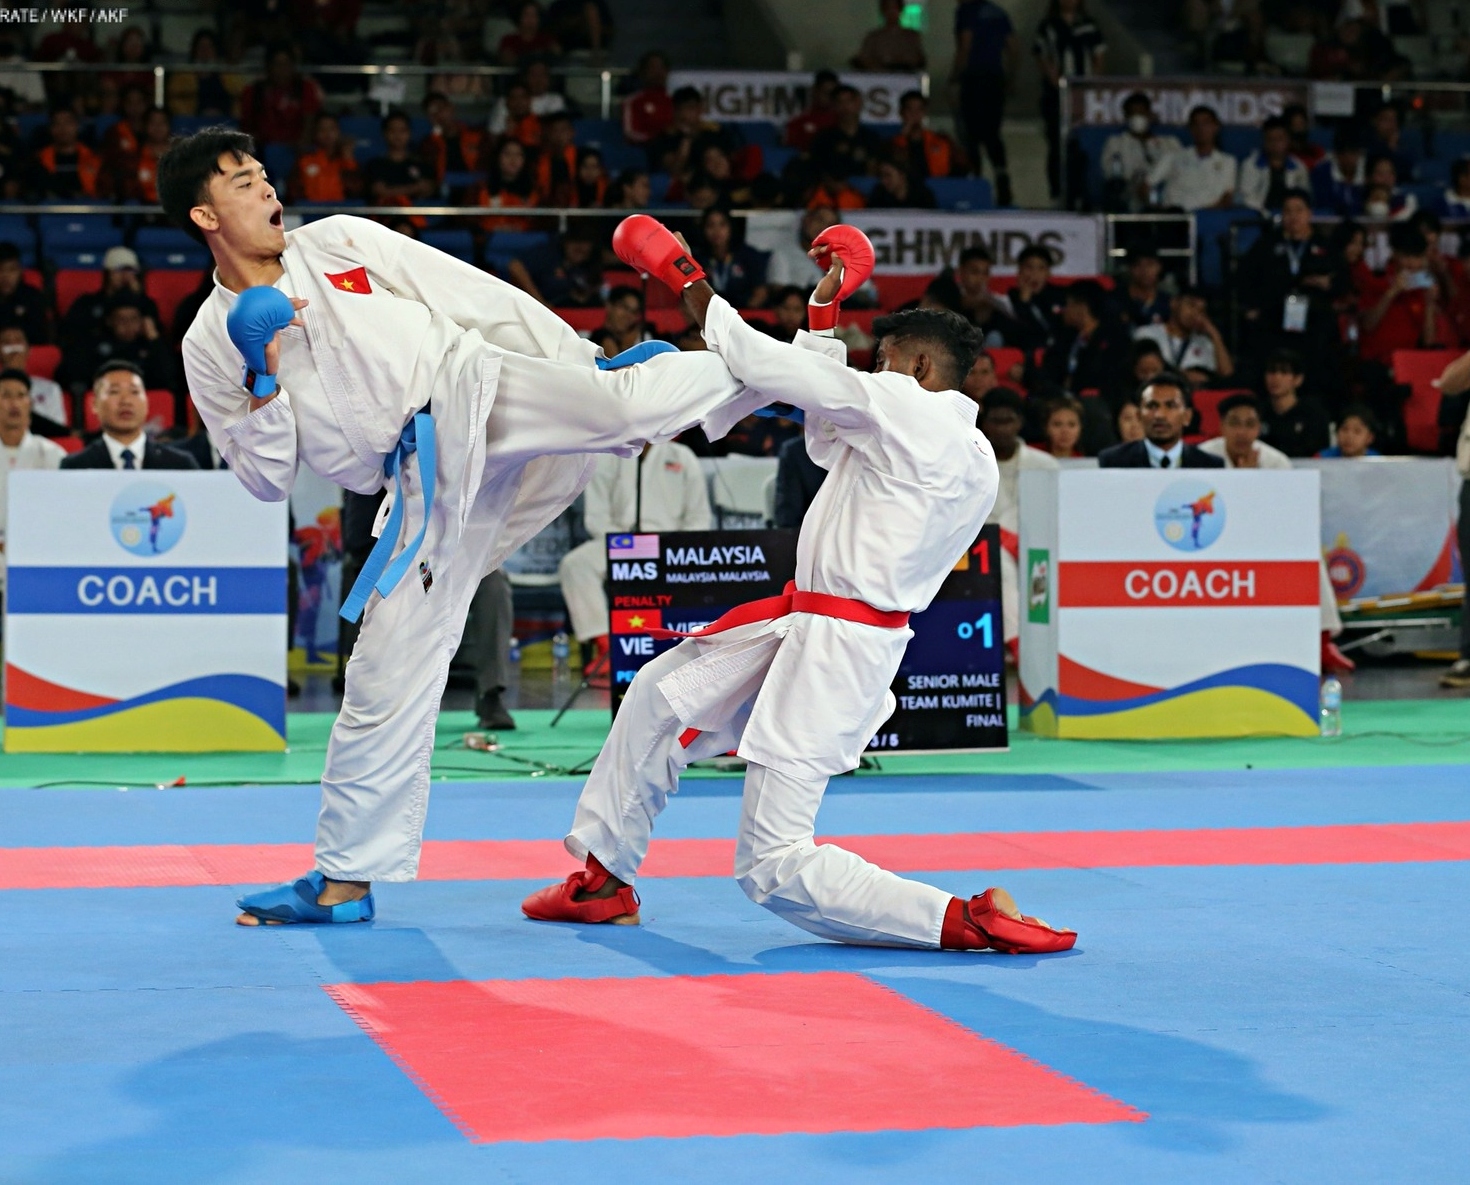 Tran Le Tan Dat (left) is the typical face of the city's karate sport. (Photo courtesy of the character)